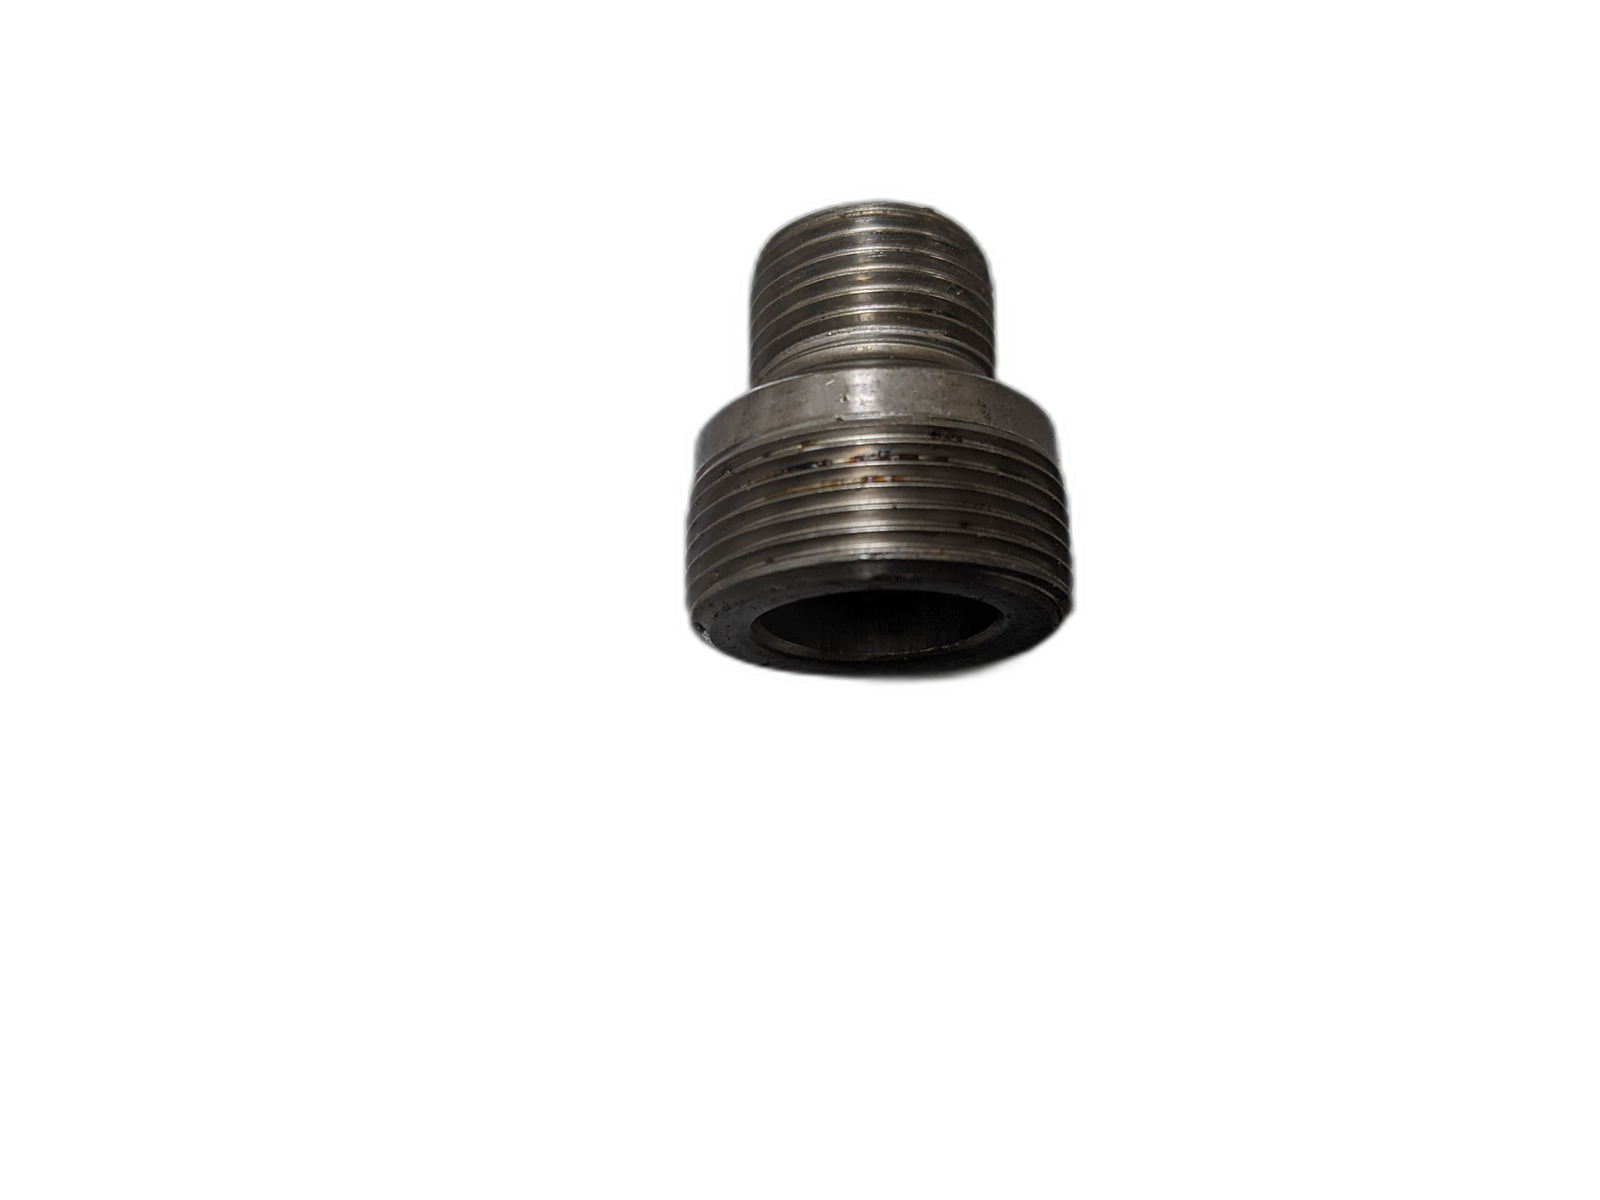 Oil Filter Nut From 2001 Toyota Celica GT-S 1.8 - $19.95